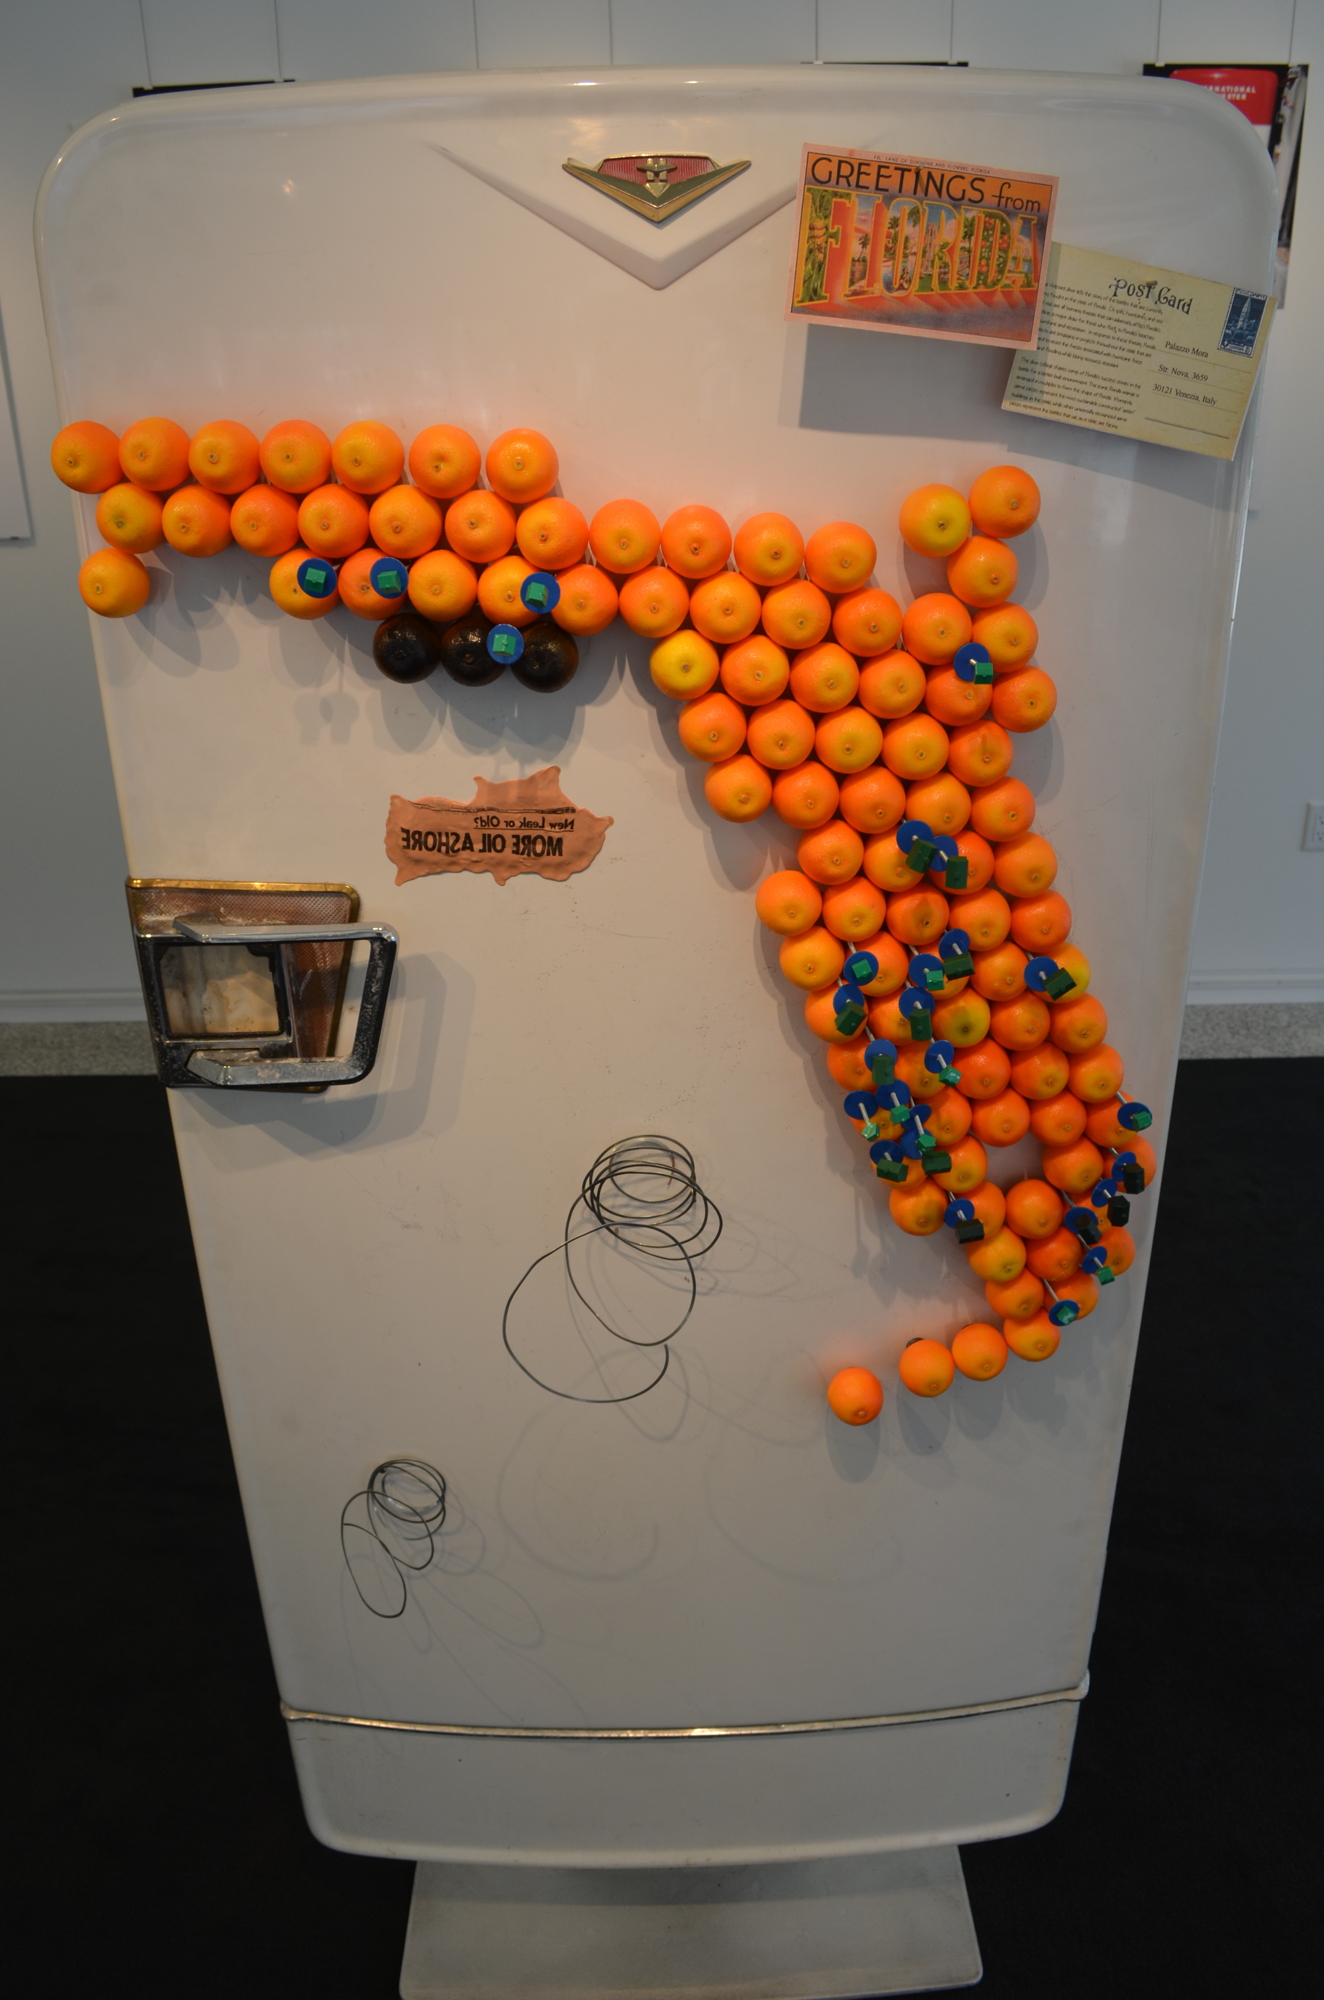 Todd Sweet’s door features oranges arranged in the shape of Florida, with black colors representing oil spills, coils depicting hurricanes and plastic houses showing environmentally sustainable structures.